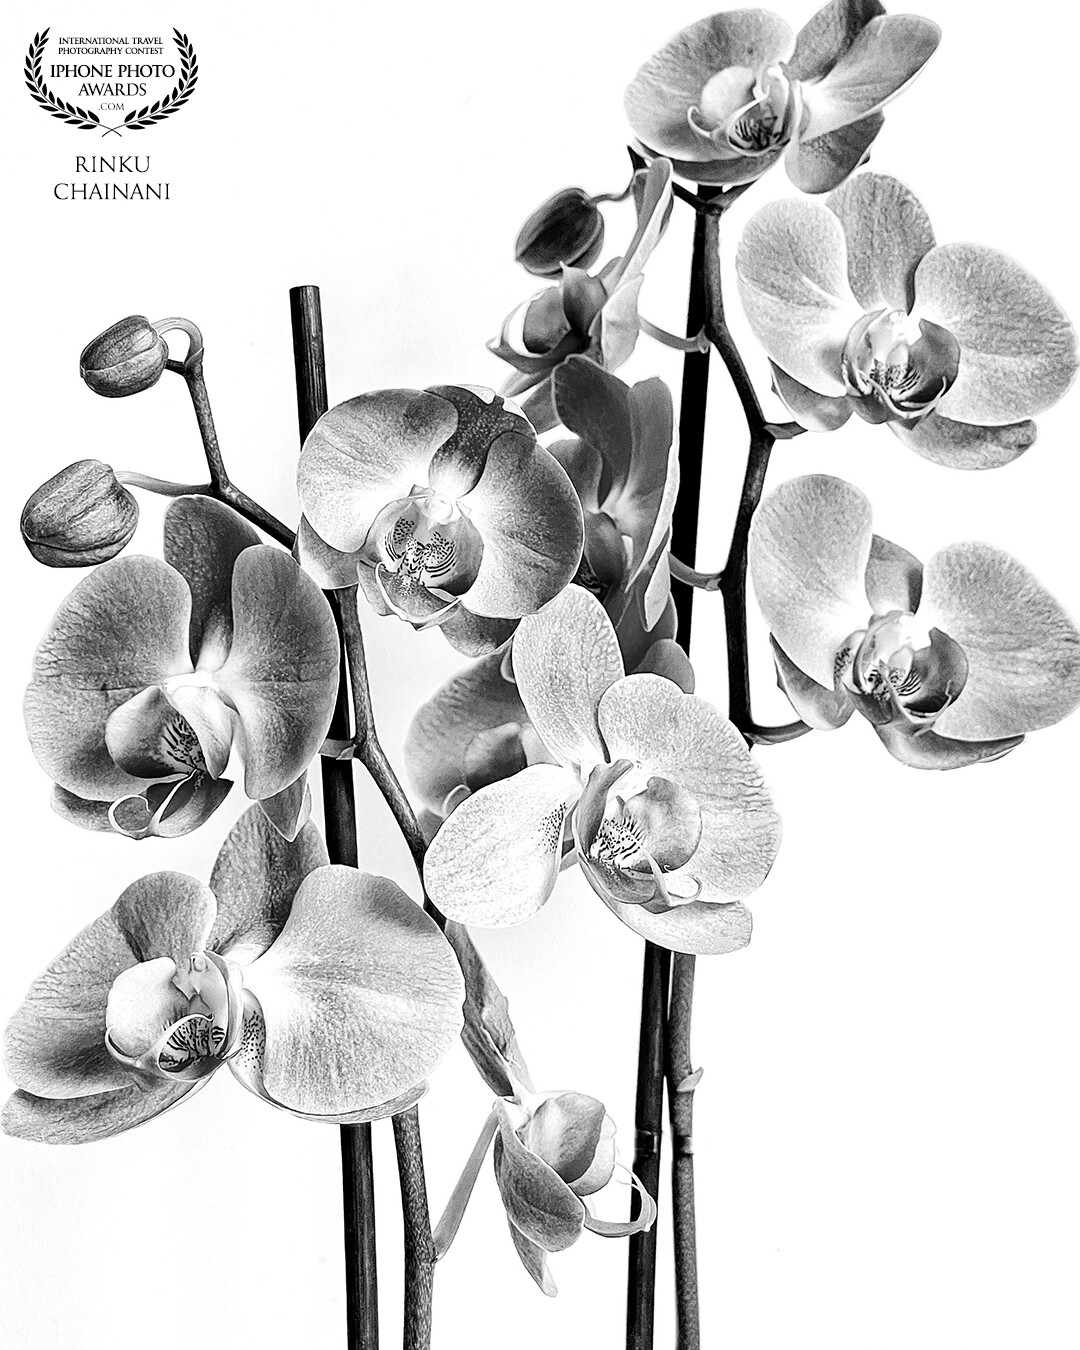 Beauty in simplicity. Sometimes life has to offer so much more in black and white. <br />
‘My Orchids’